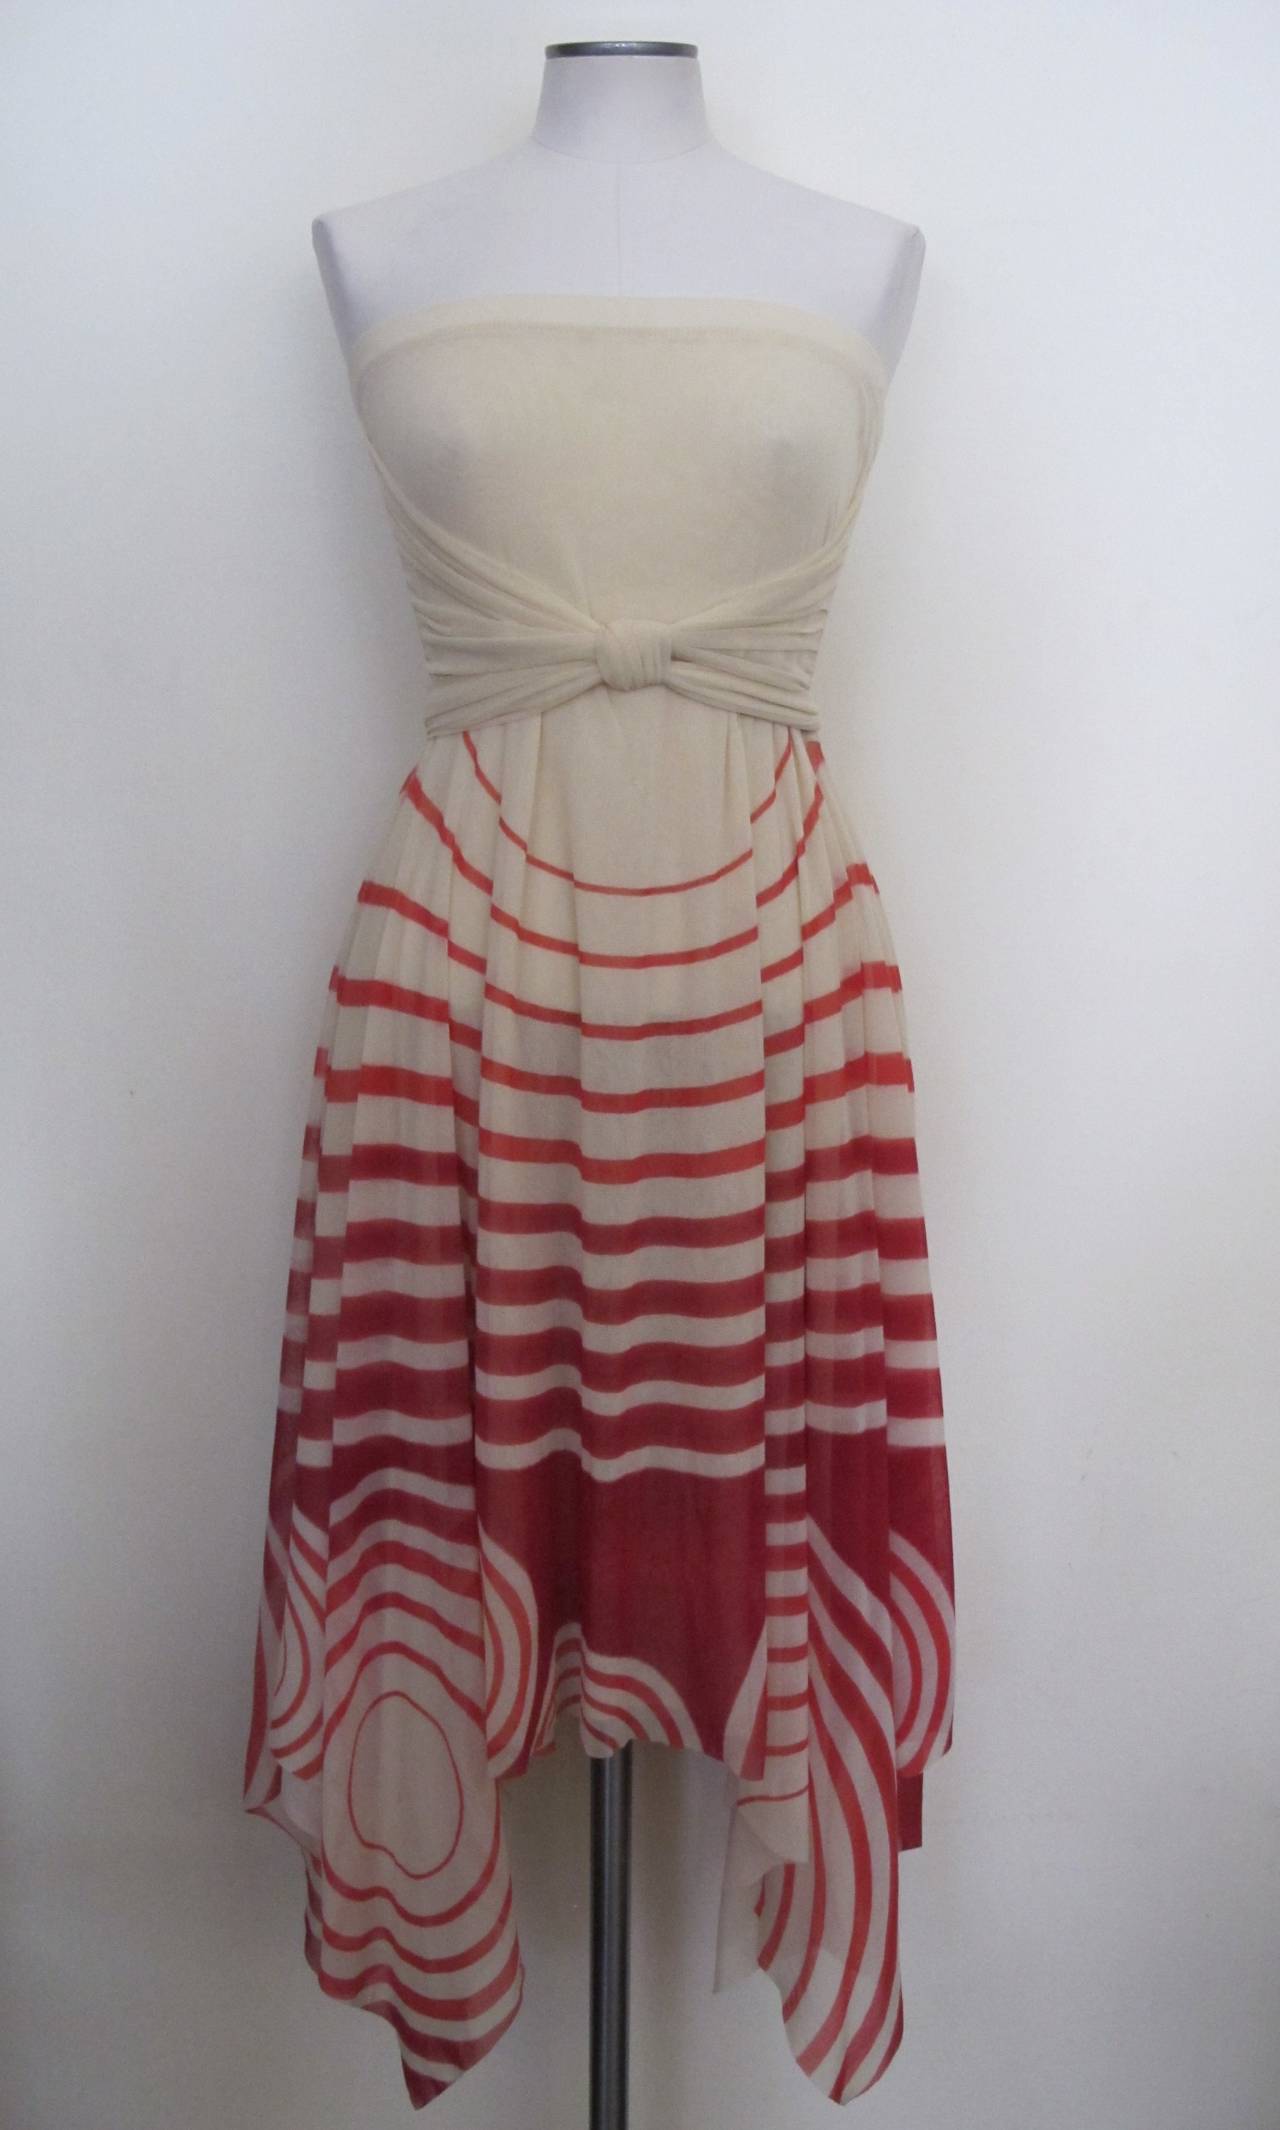 Jean Paul Gaultier Iconic Halter-Strapless Dress or Skirt In Excellent Condition For Sale In San Francisco, CA